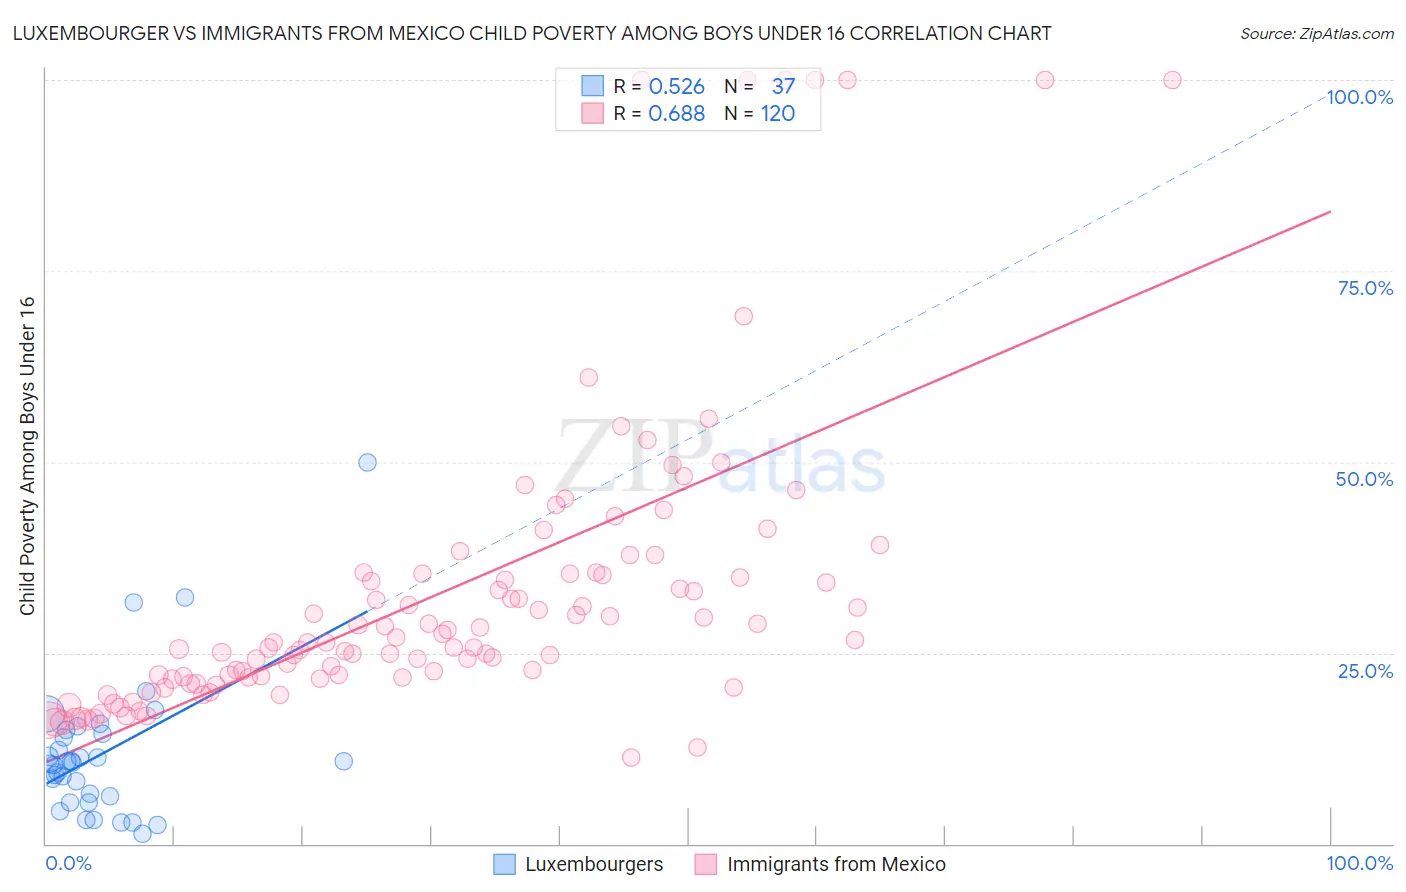 Luxembourger vs Immigrants from Mexico Child Poverty Among Boys Under 16